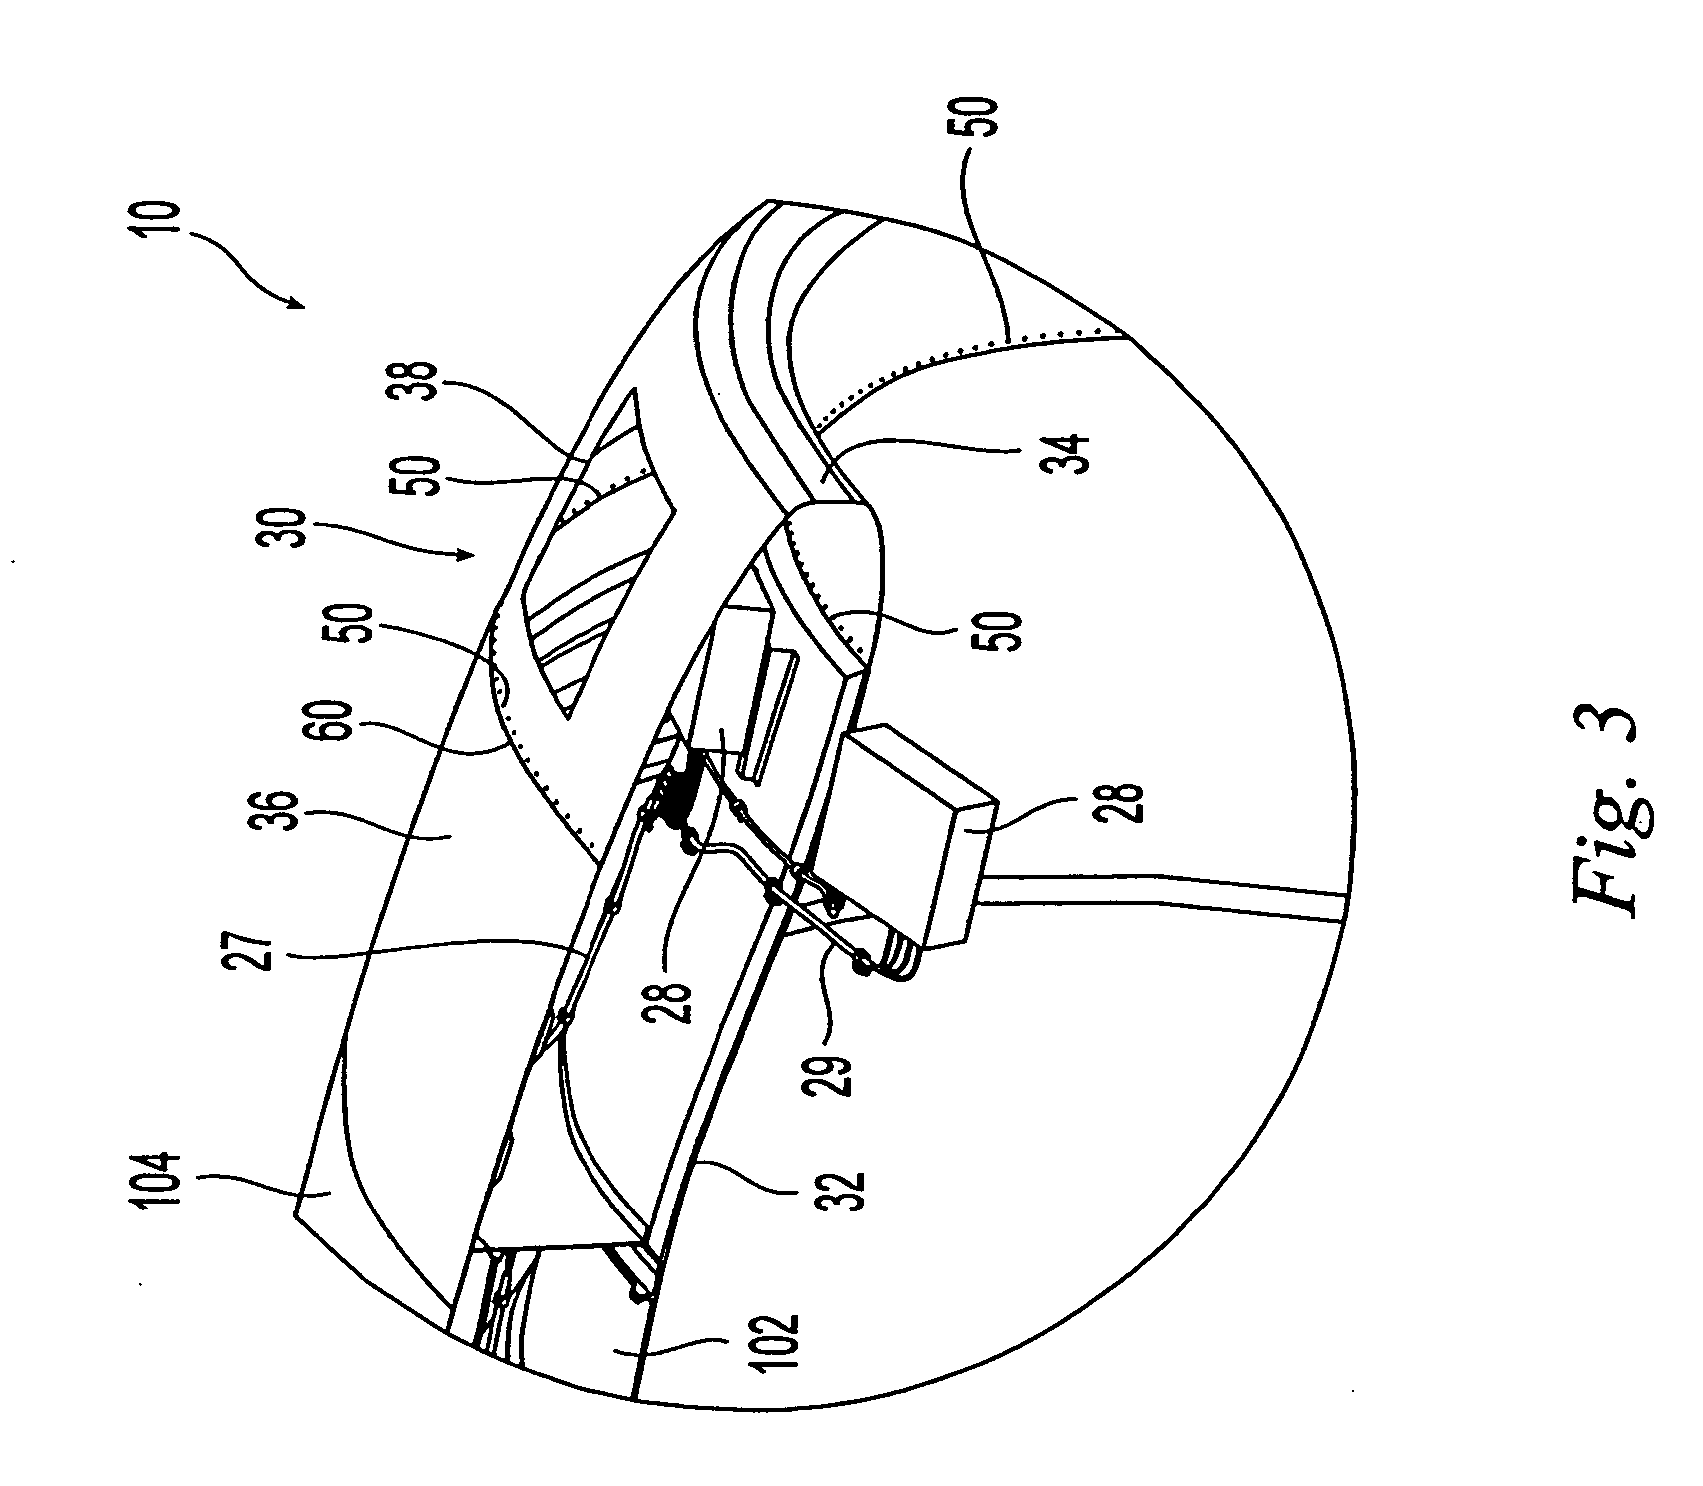 Aircraft engine nacelle inlet having access opening for electrical ice protection system